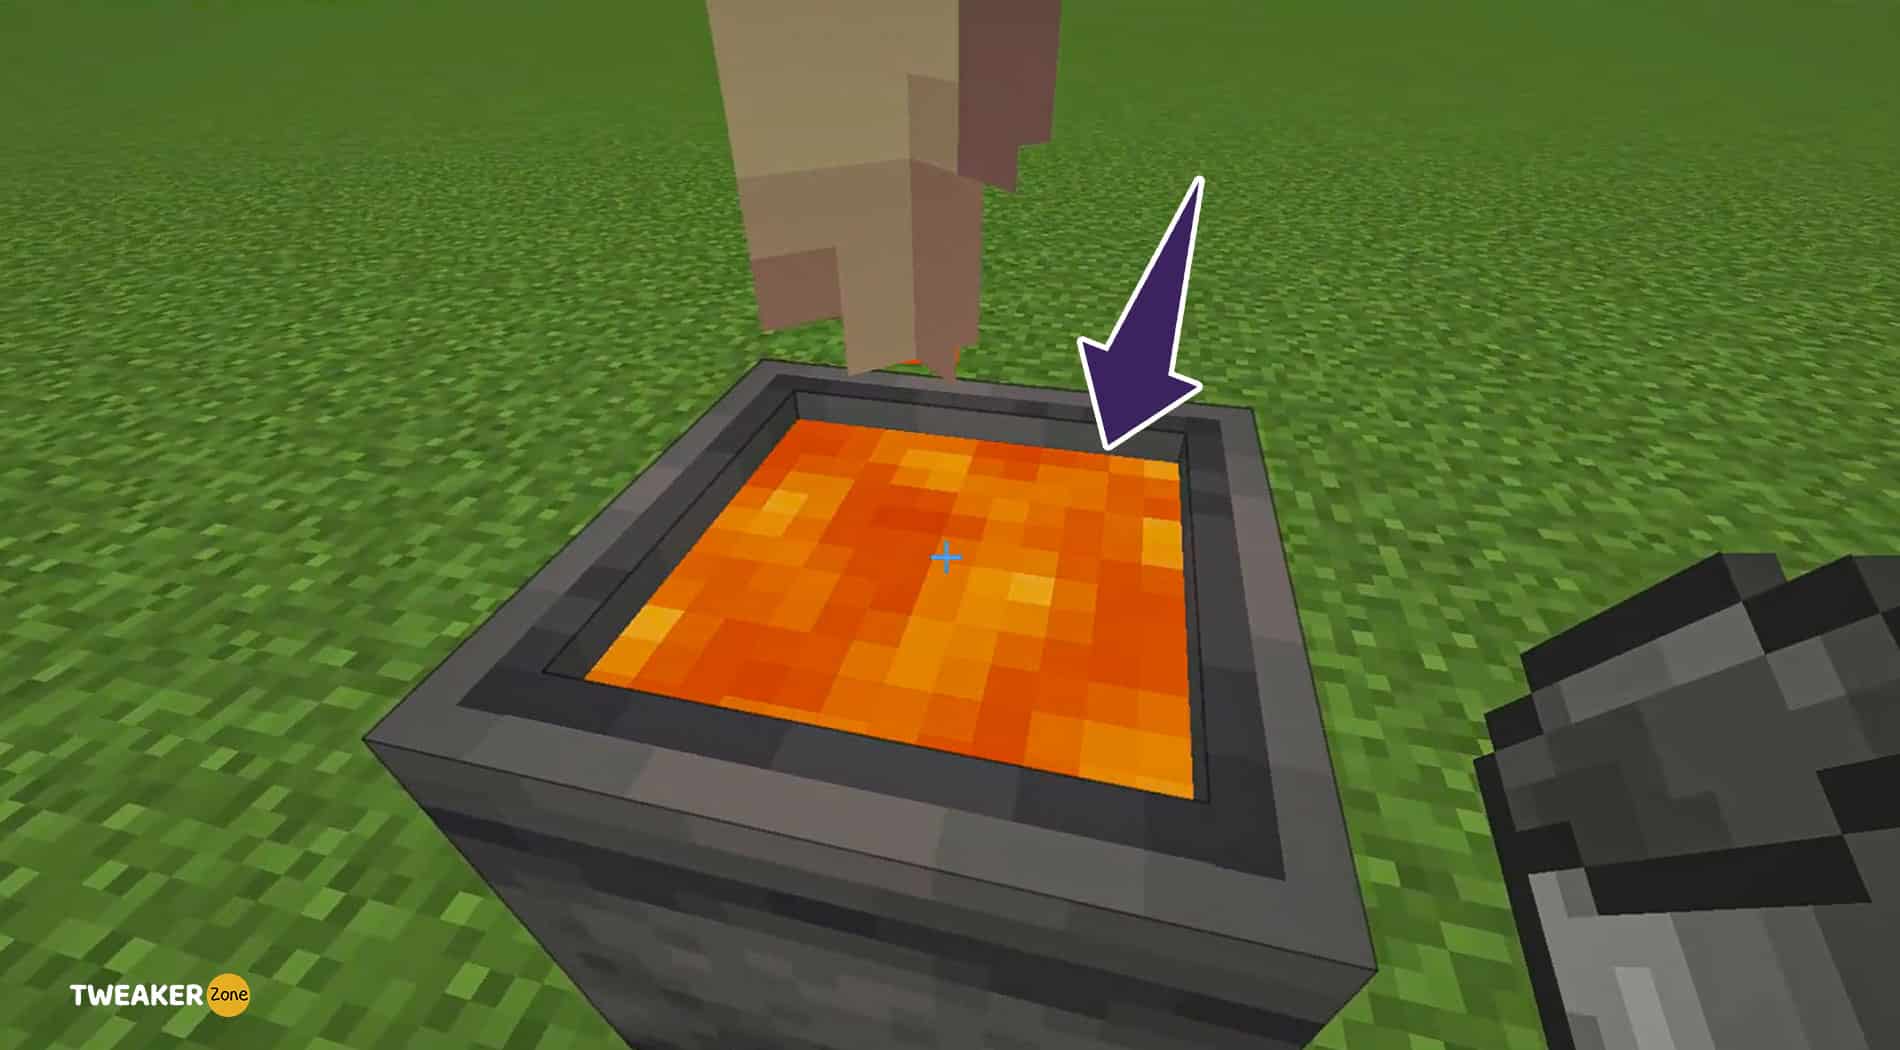 Once the cauldron is filled with molten lava, you can collect and use it.